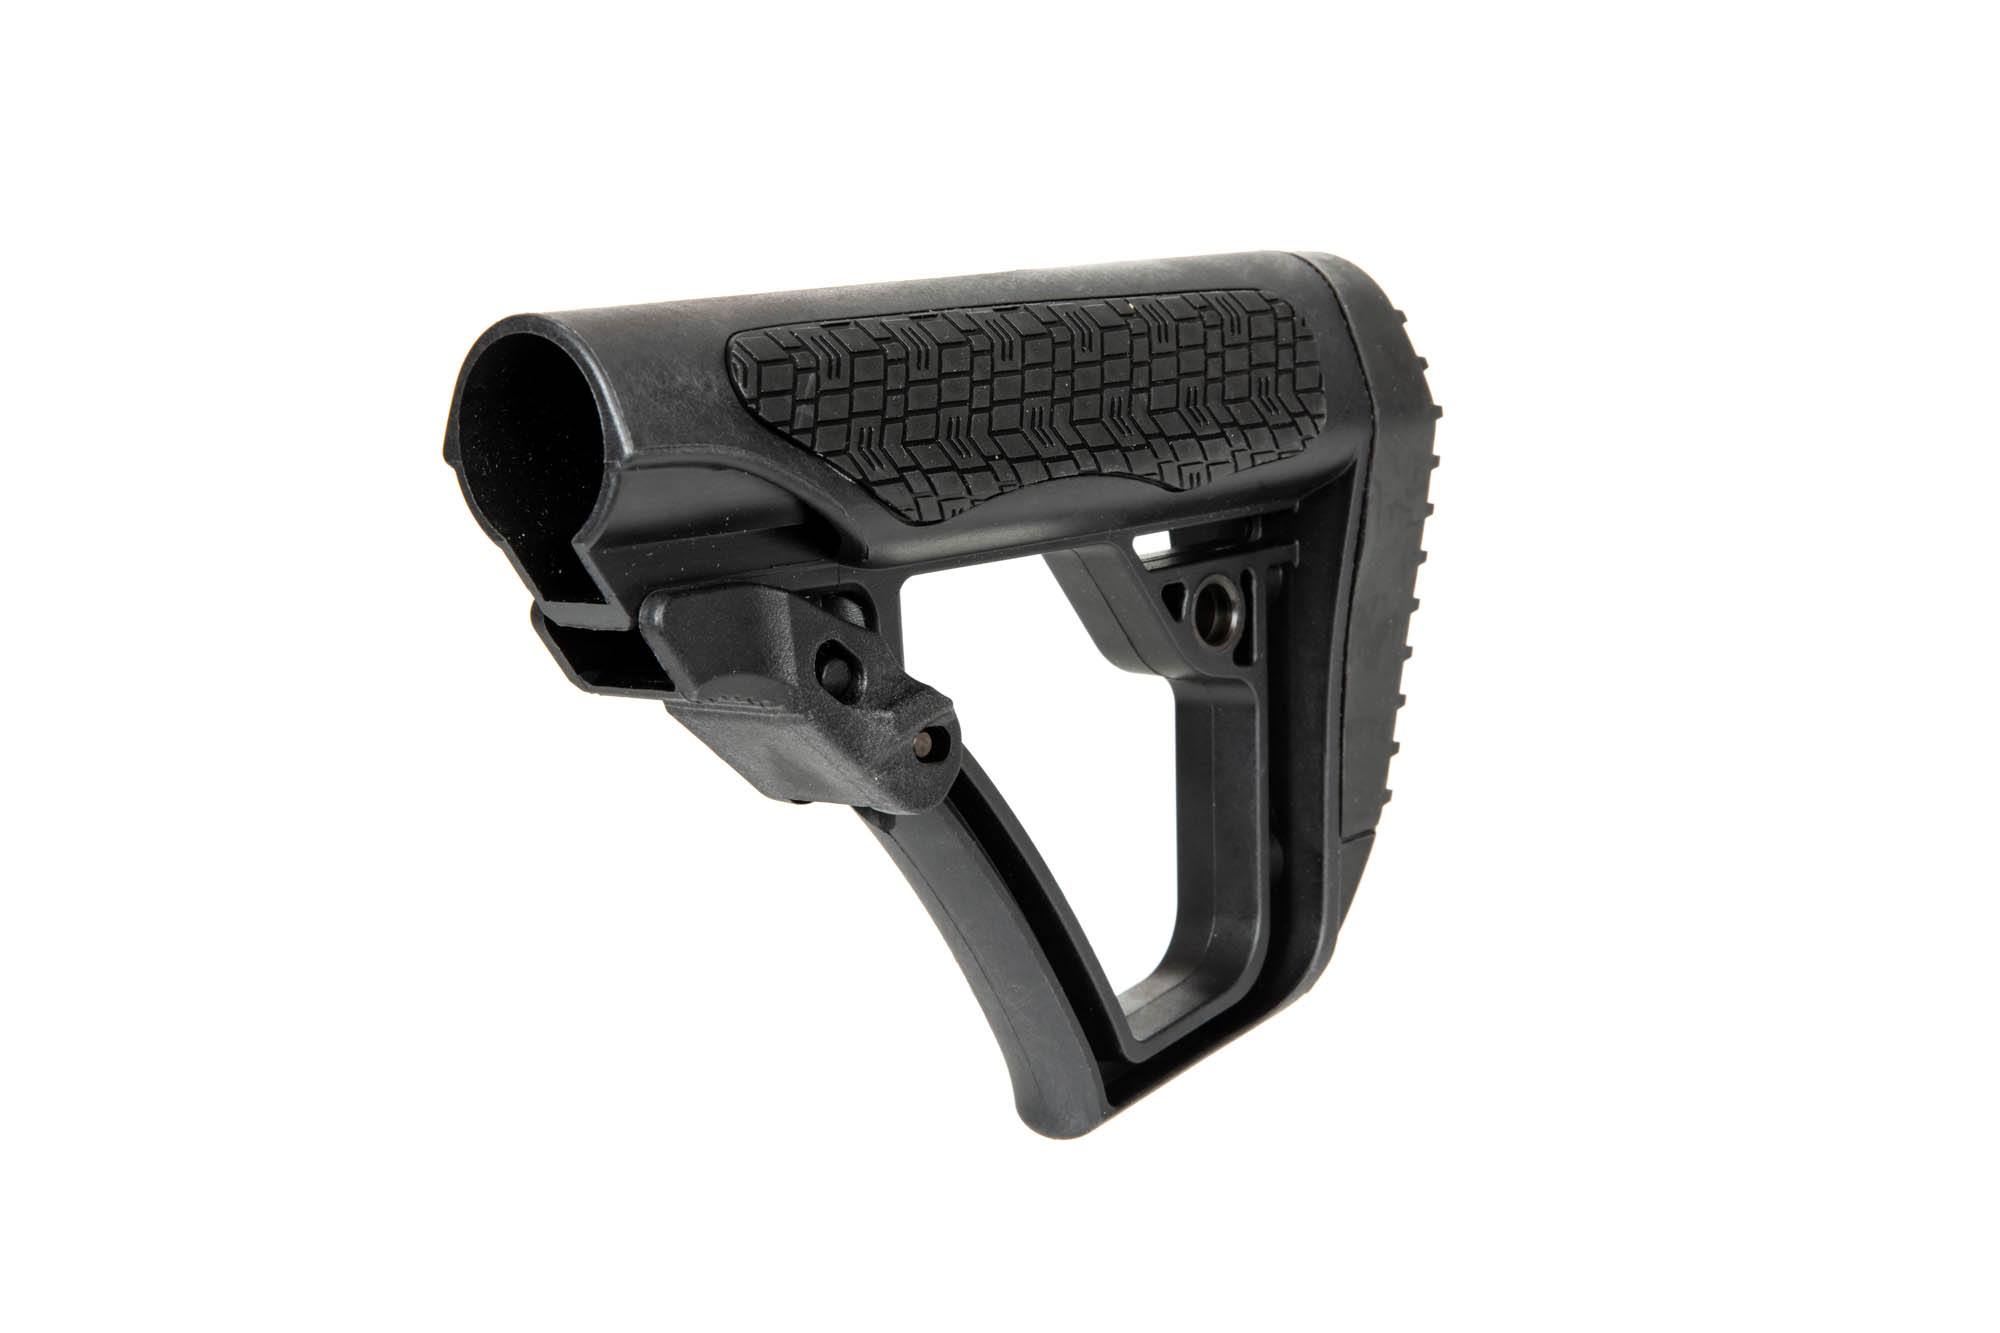 HM0374 polymer stock for the M4 / M16 - black by DBOY on Airsoft Mania Europe